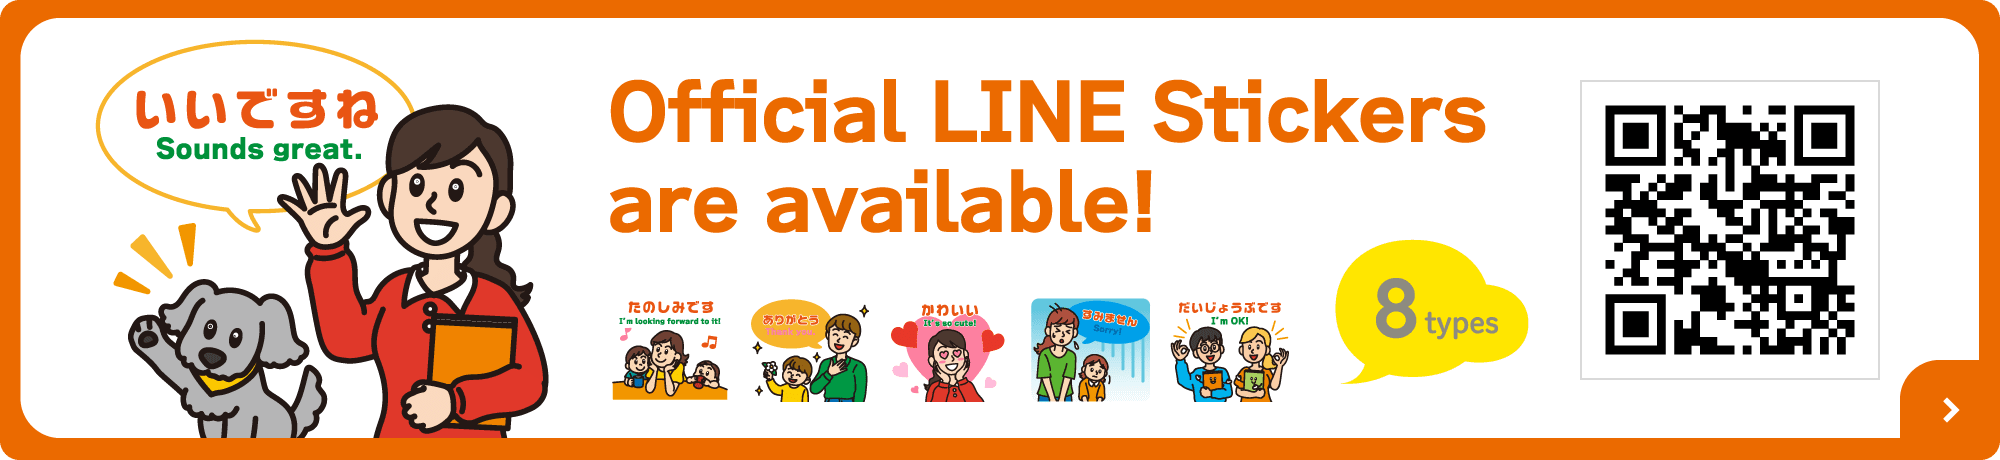 Official LINE Stickers are available!